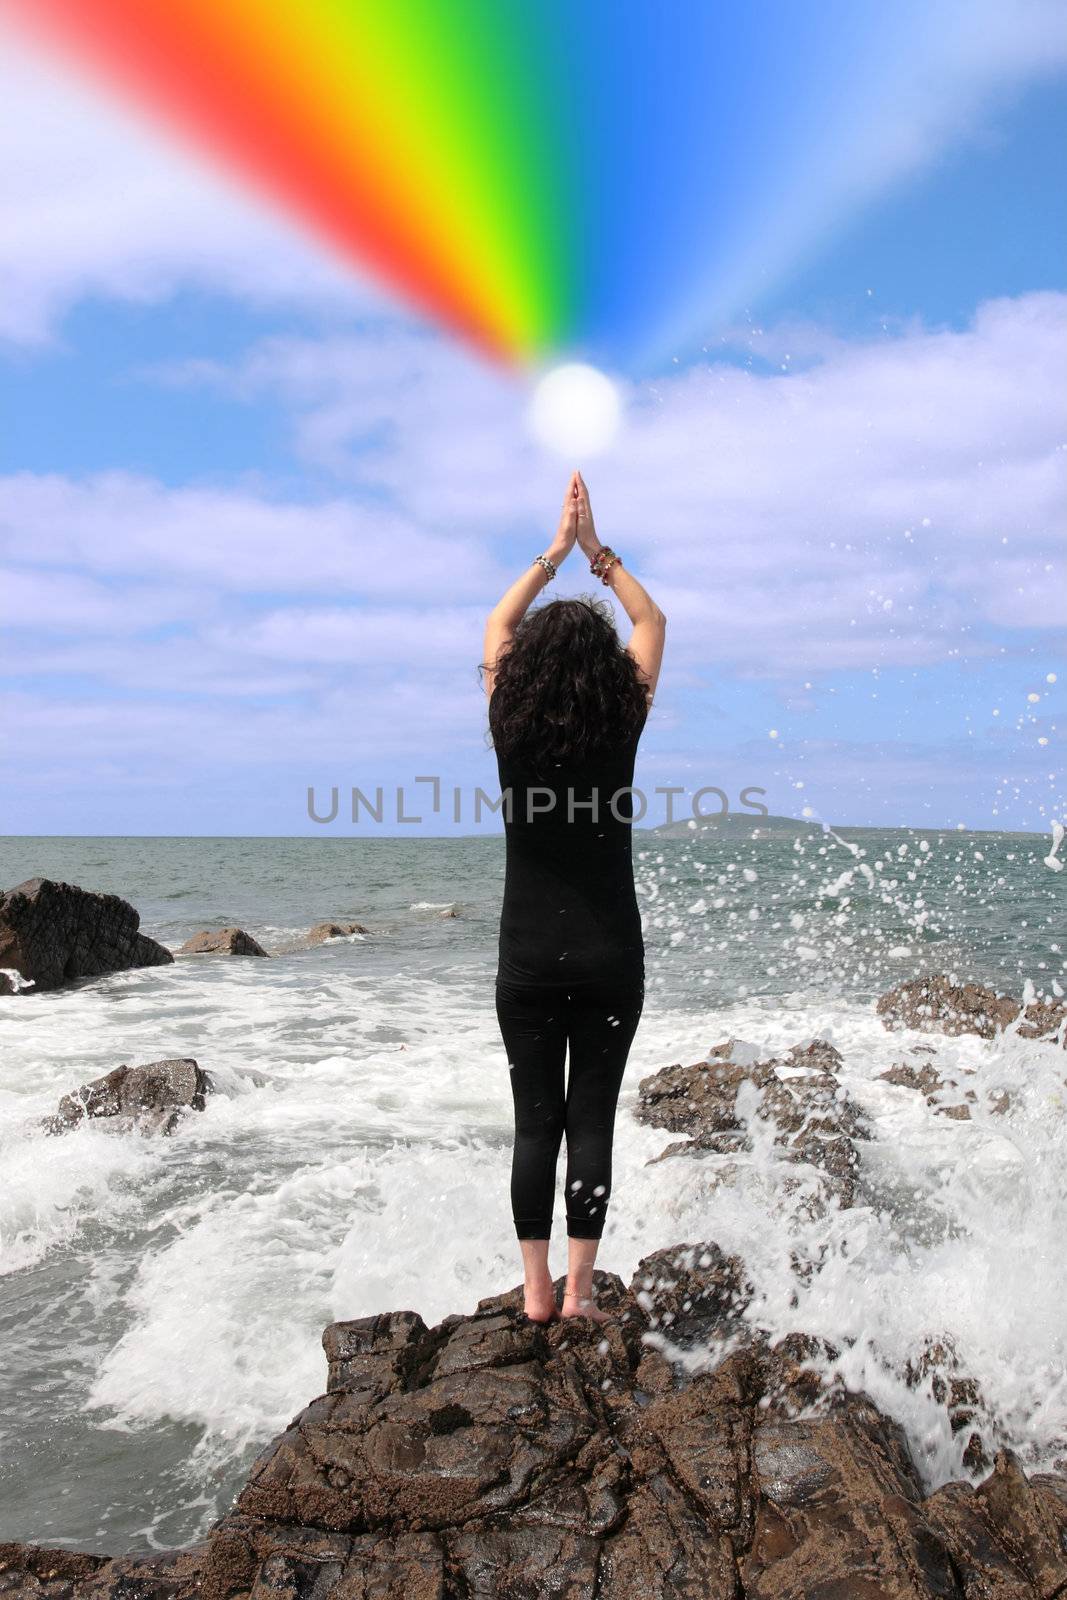 beautiful woman on the edge of the rocks with waves splashing with ball of energy emiting rainbow